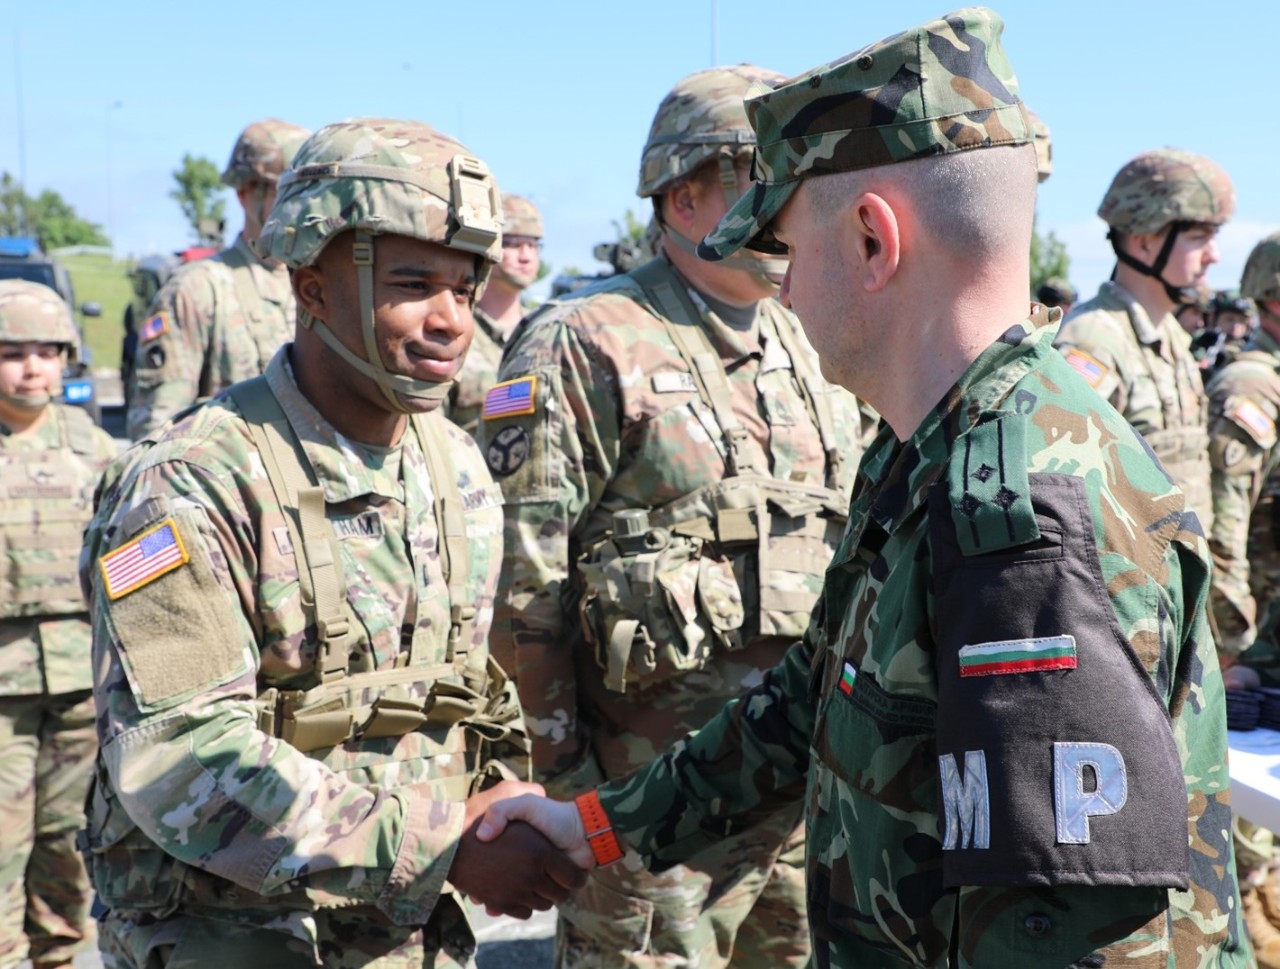 Capt. Eric Cheatham, operations officer for Athens’ 117th Military Police Battalion, meets Col. Dimitar Dimitrov, with the Bulgarian Military Police Force, during the opening ceremony for Beyond Horizon 2024, a multi-national training exercise held at Bulgaria’s Novo Selo Training Site, May 14. Nearly 20 Soldiers from Athens’ 117th Military Police Battalion and Murfreesboro’s 269th Military Police Company will train with more than 140 military policemen from Bulgaria, Canada, Greece, North Macedonia, and Romania during the nine-day exercise to improve multi-national teamwork and combat skills. (photo by Lt. Col. Darrin Haas)